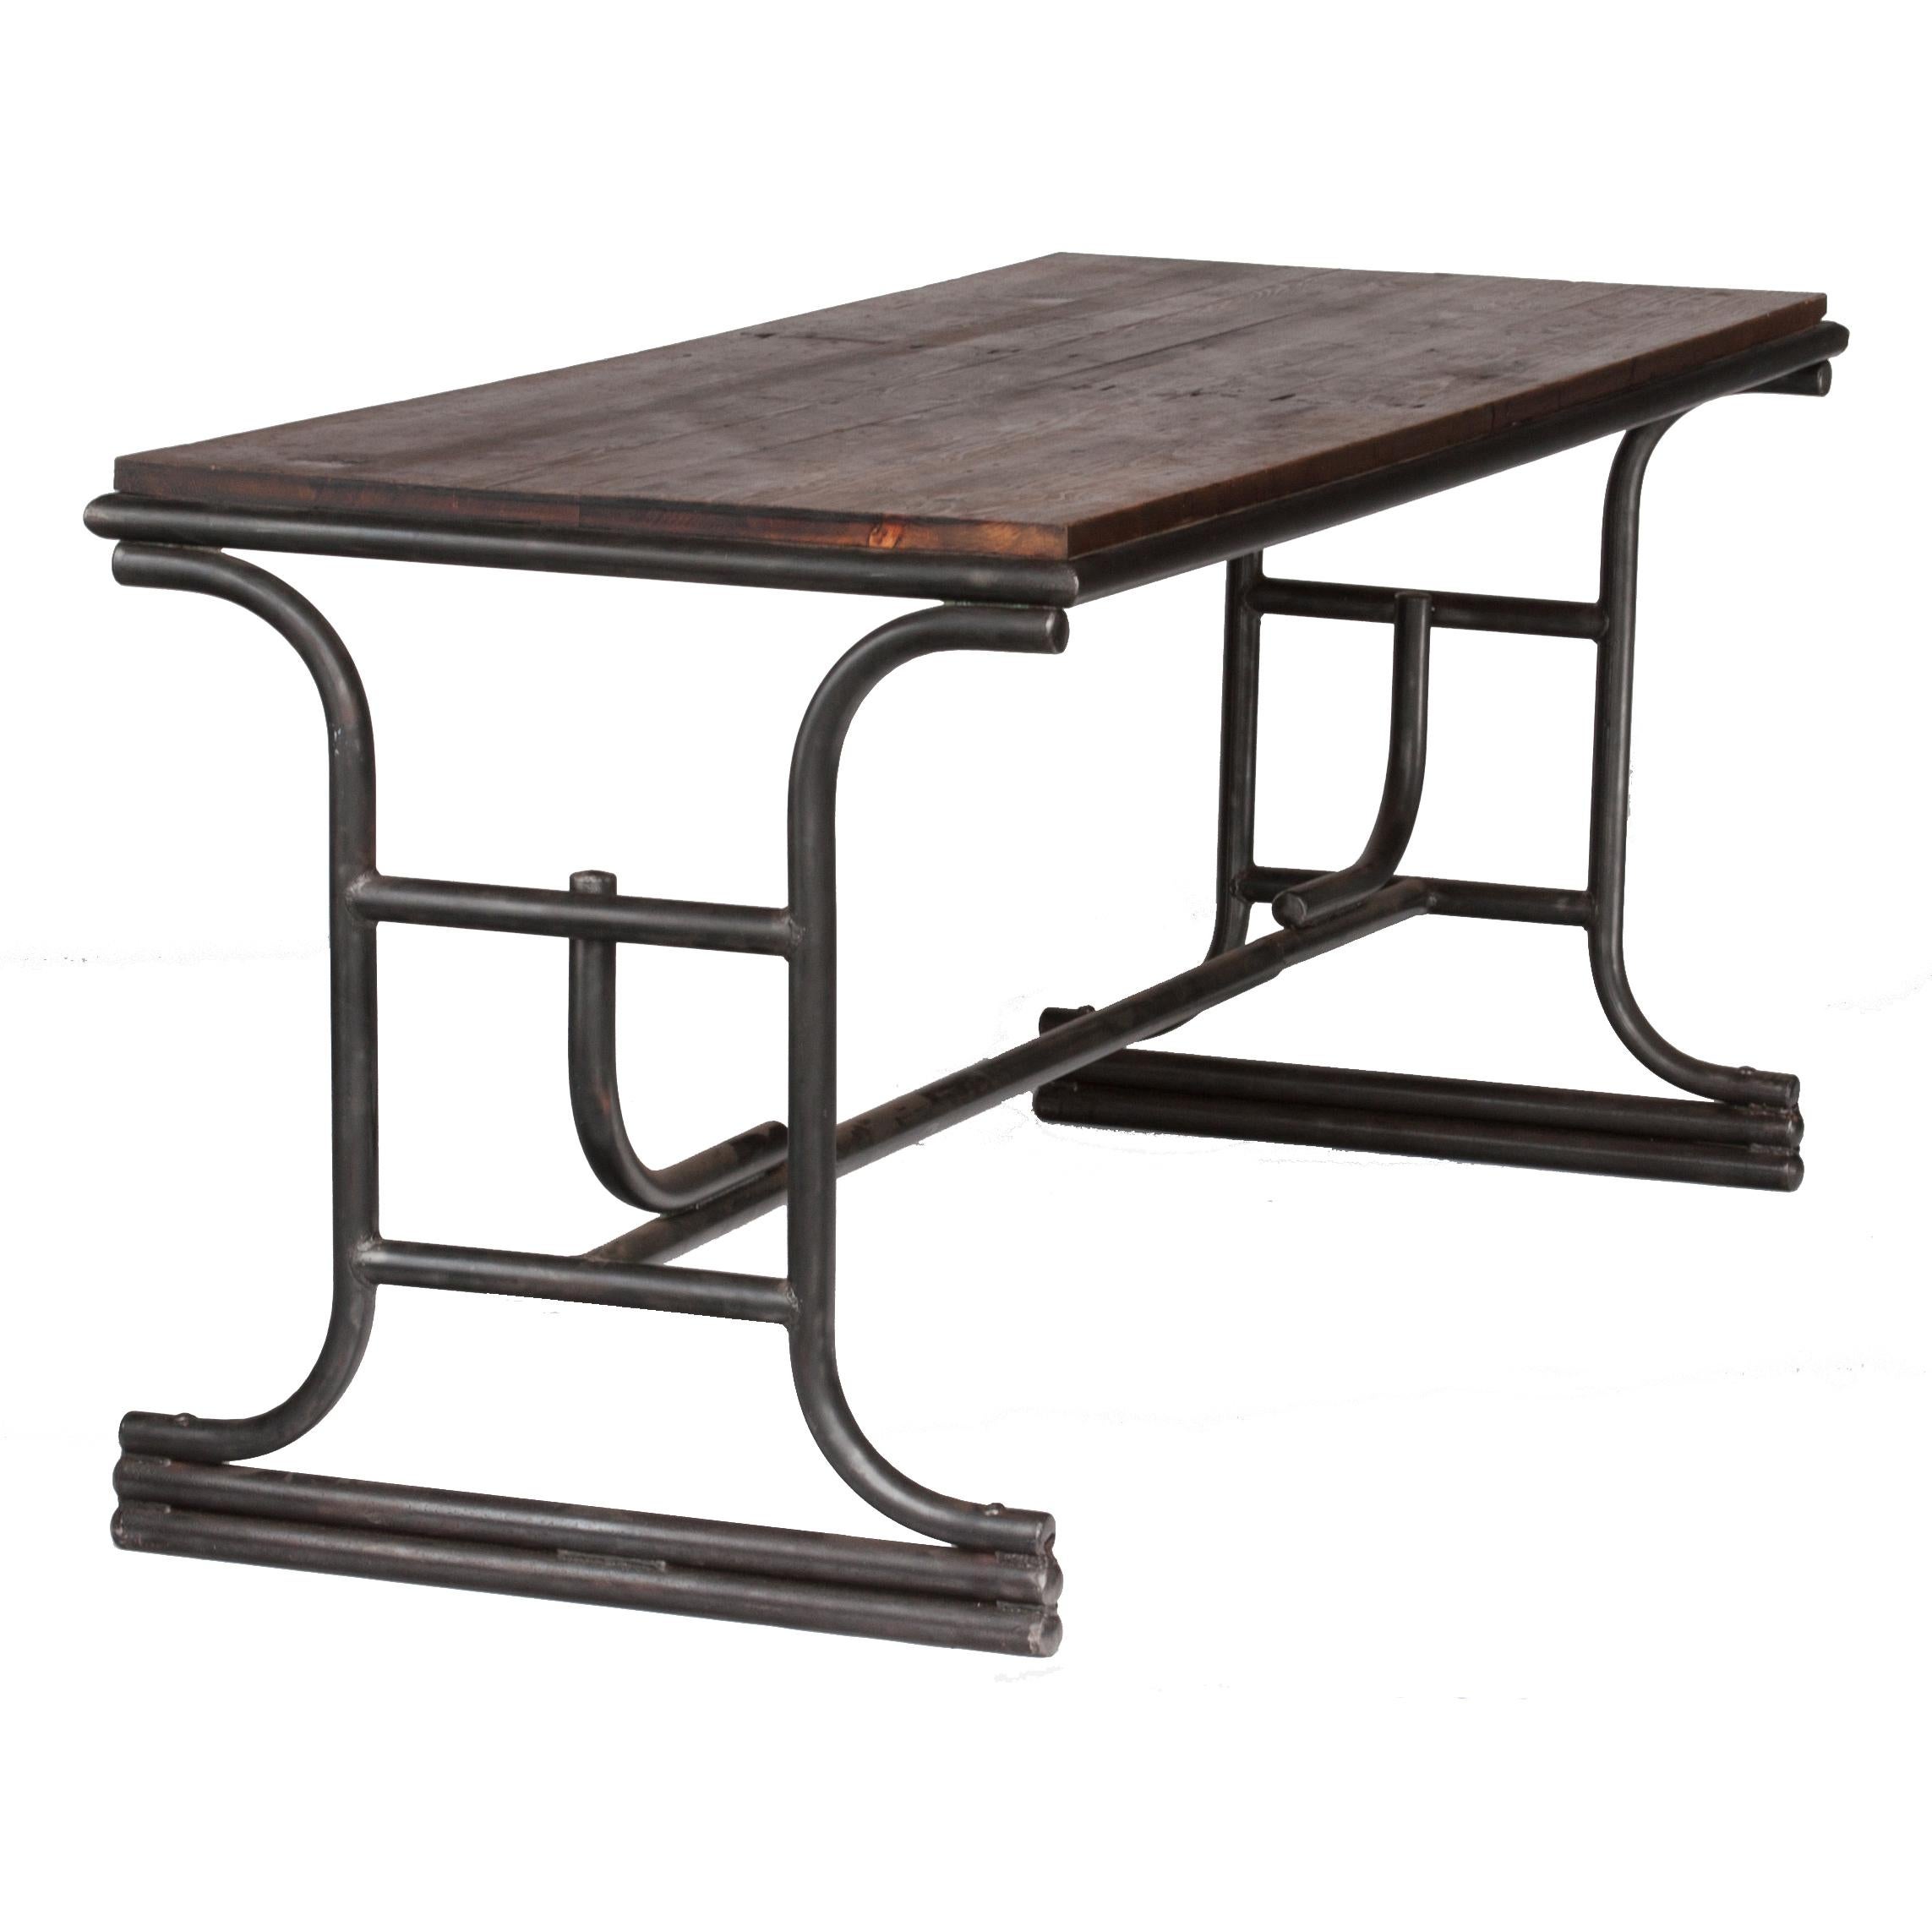 1920s French Industrial Metal Table with Wood Top